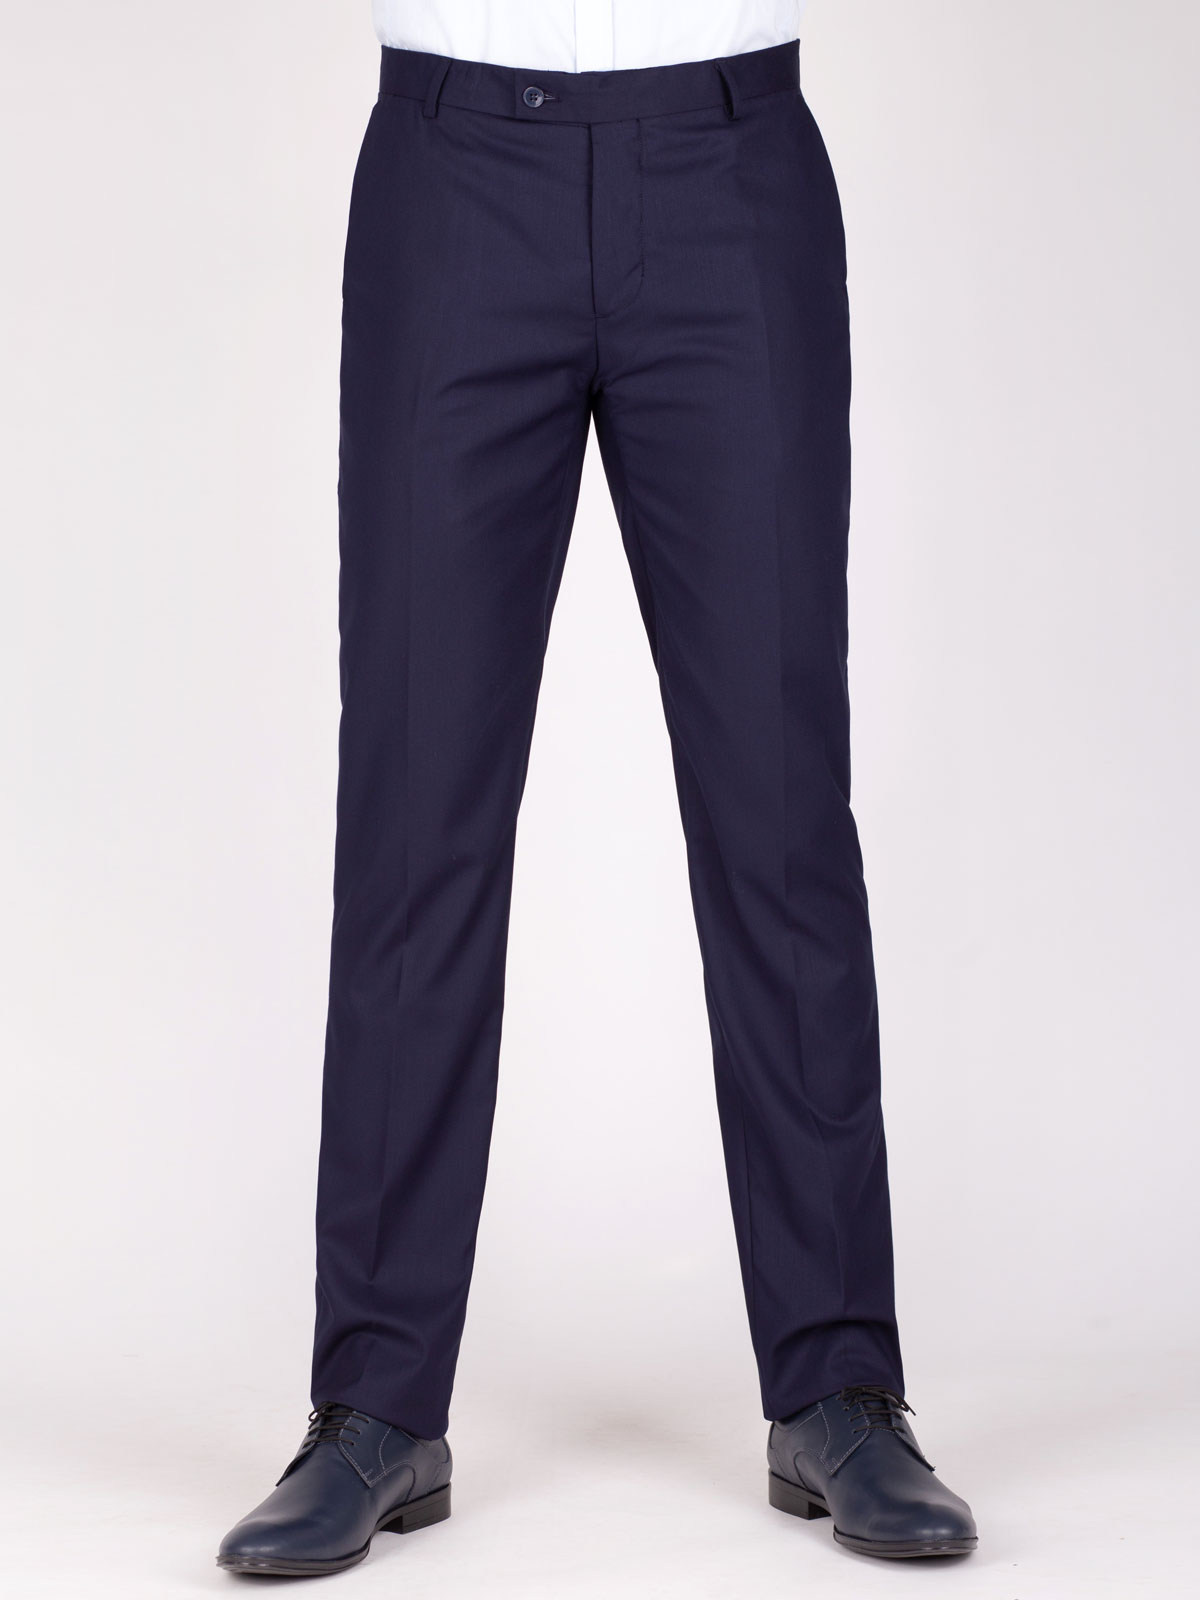 Navy Blue Solid Italian Fit Cotton Blend Formal Trousers For Men – TAD